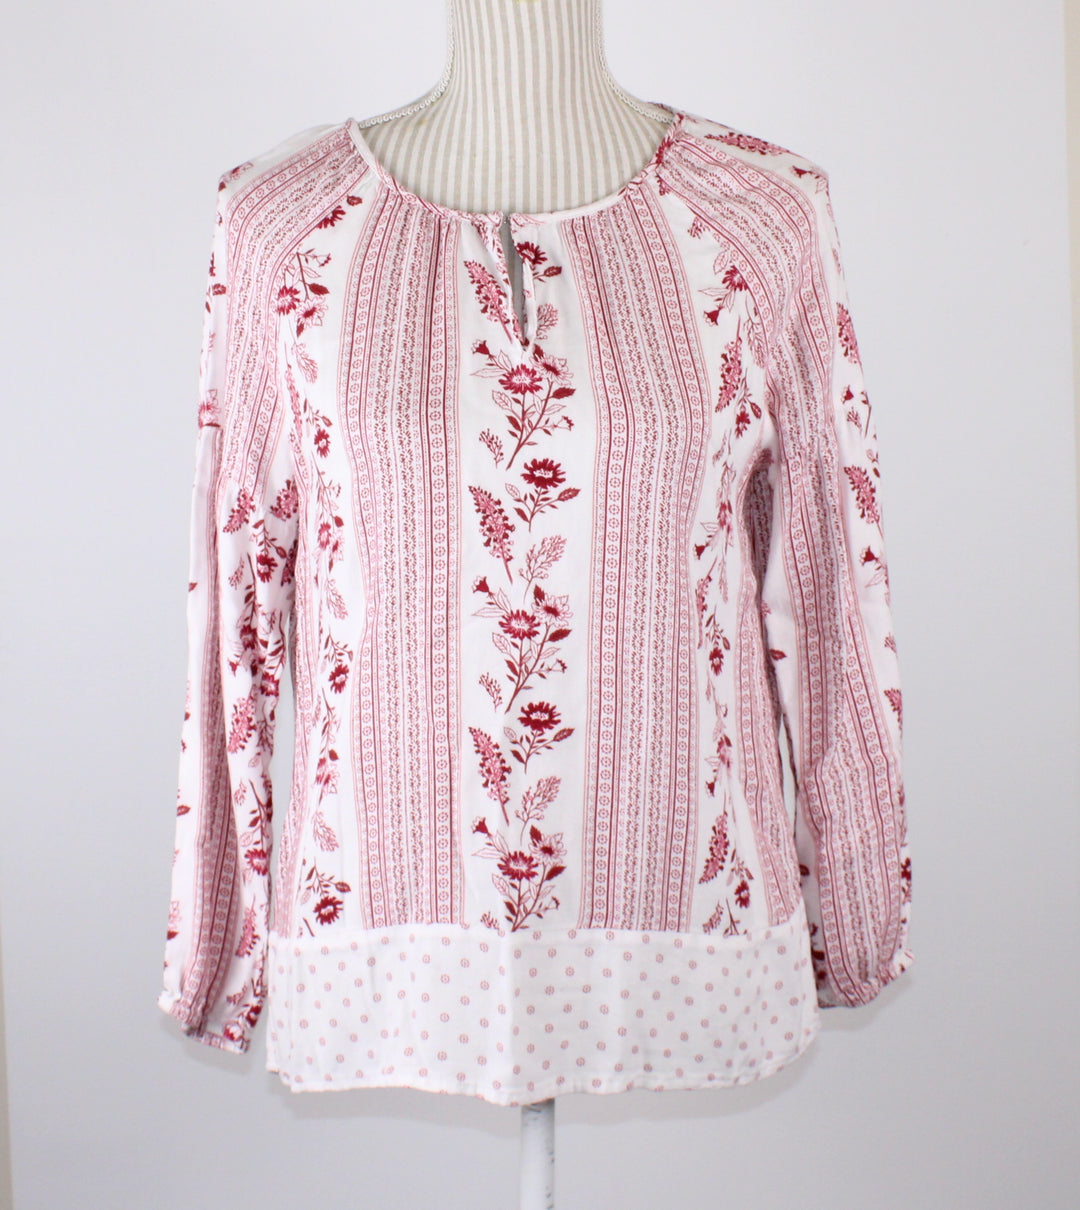 RED AND WHITE TOP LADIES APPROX MEDIUM EUC